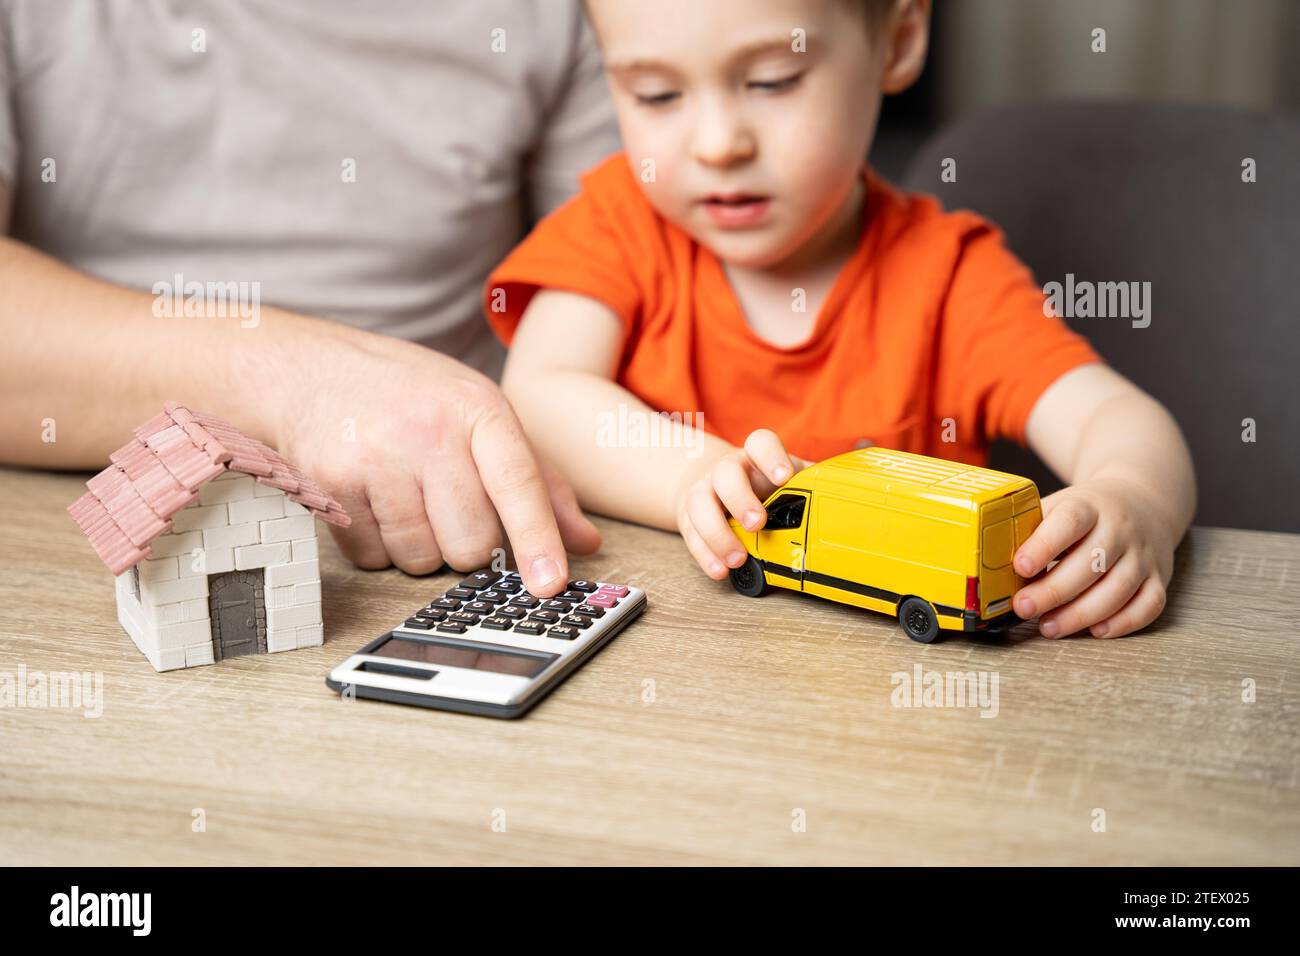 Home moving. Sending and receiving parcels and online orders. A child and his father calculate the cost of transporting boxes on a calculator. Stock Photo